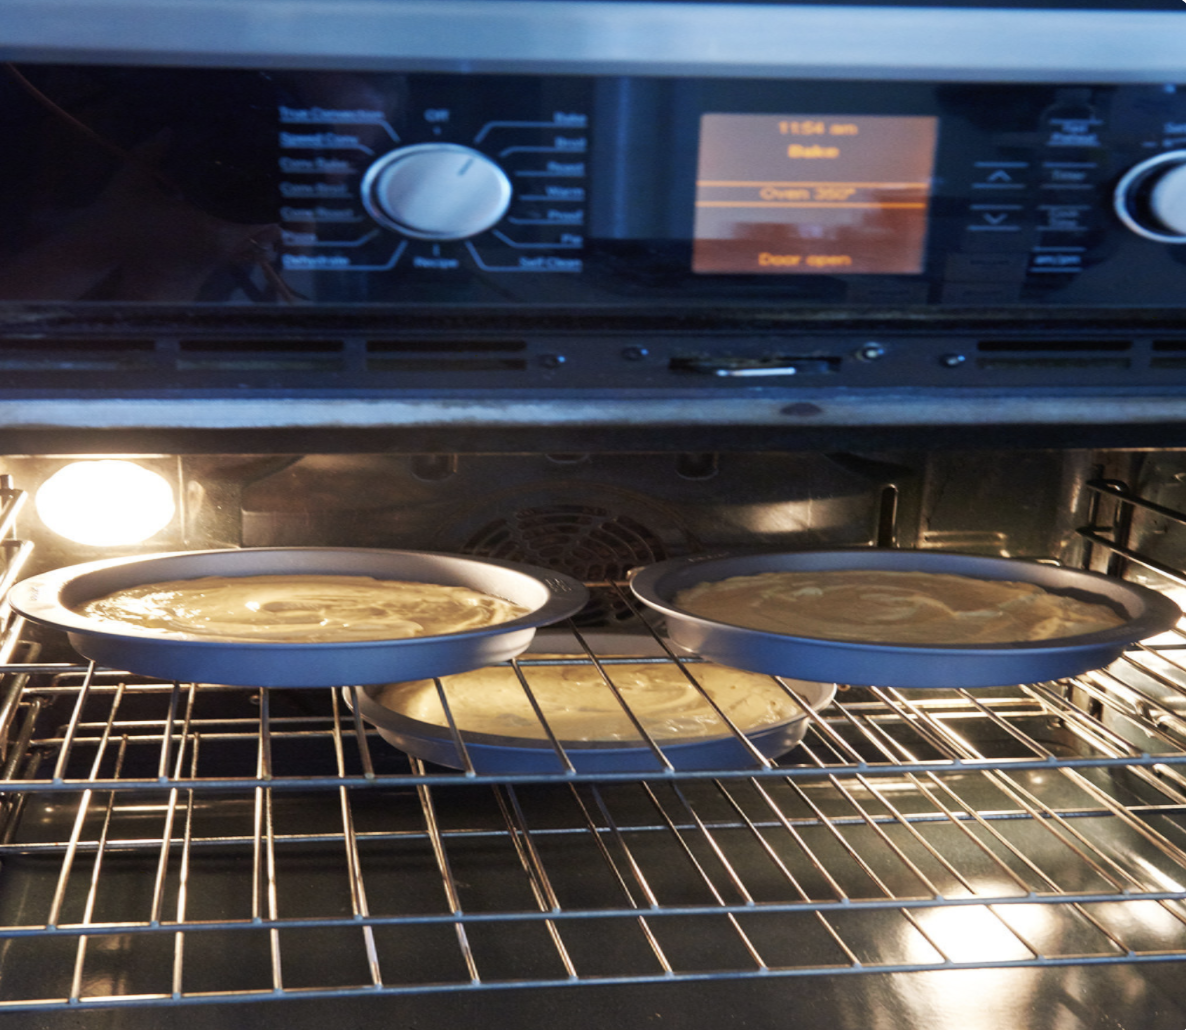 An oven with its door open, while three cakes are baking inside